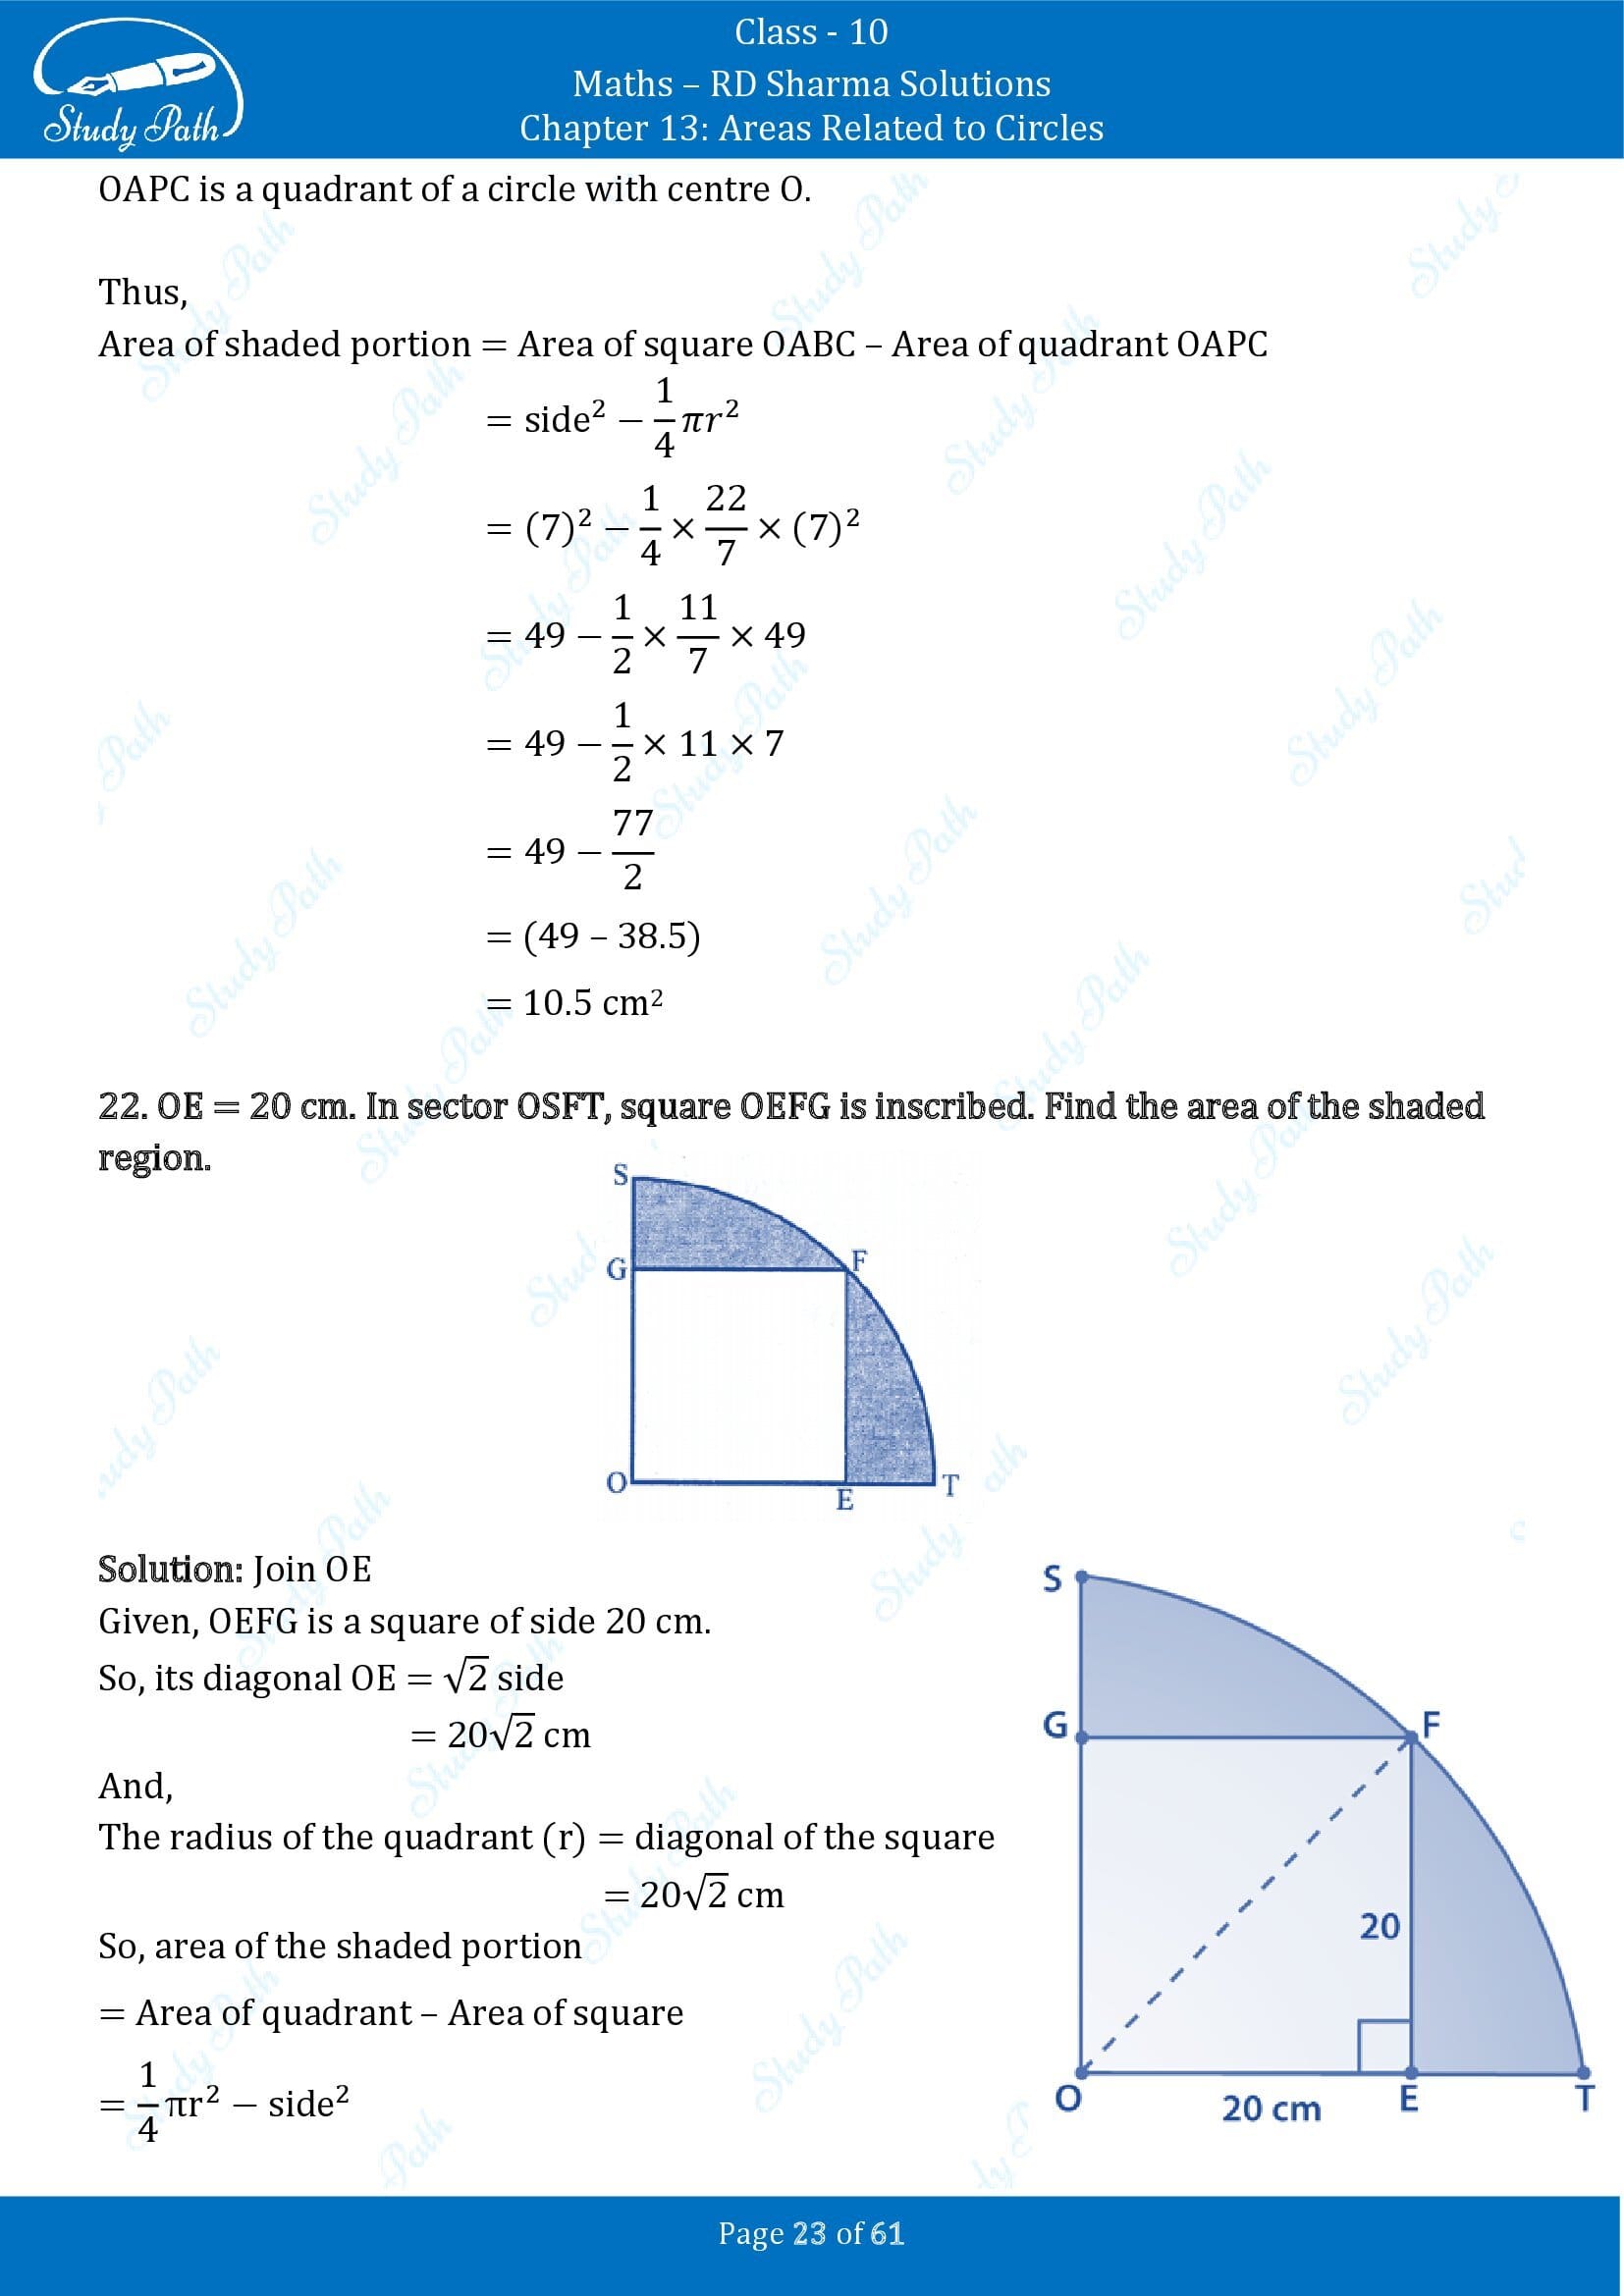 RD Sharma Solutions Class 10 Chapter 13 Areas Related to Circles Exercise 13.4 00023